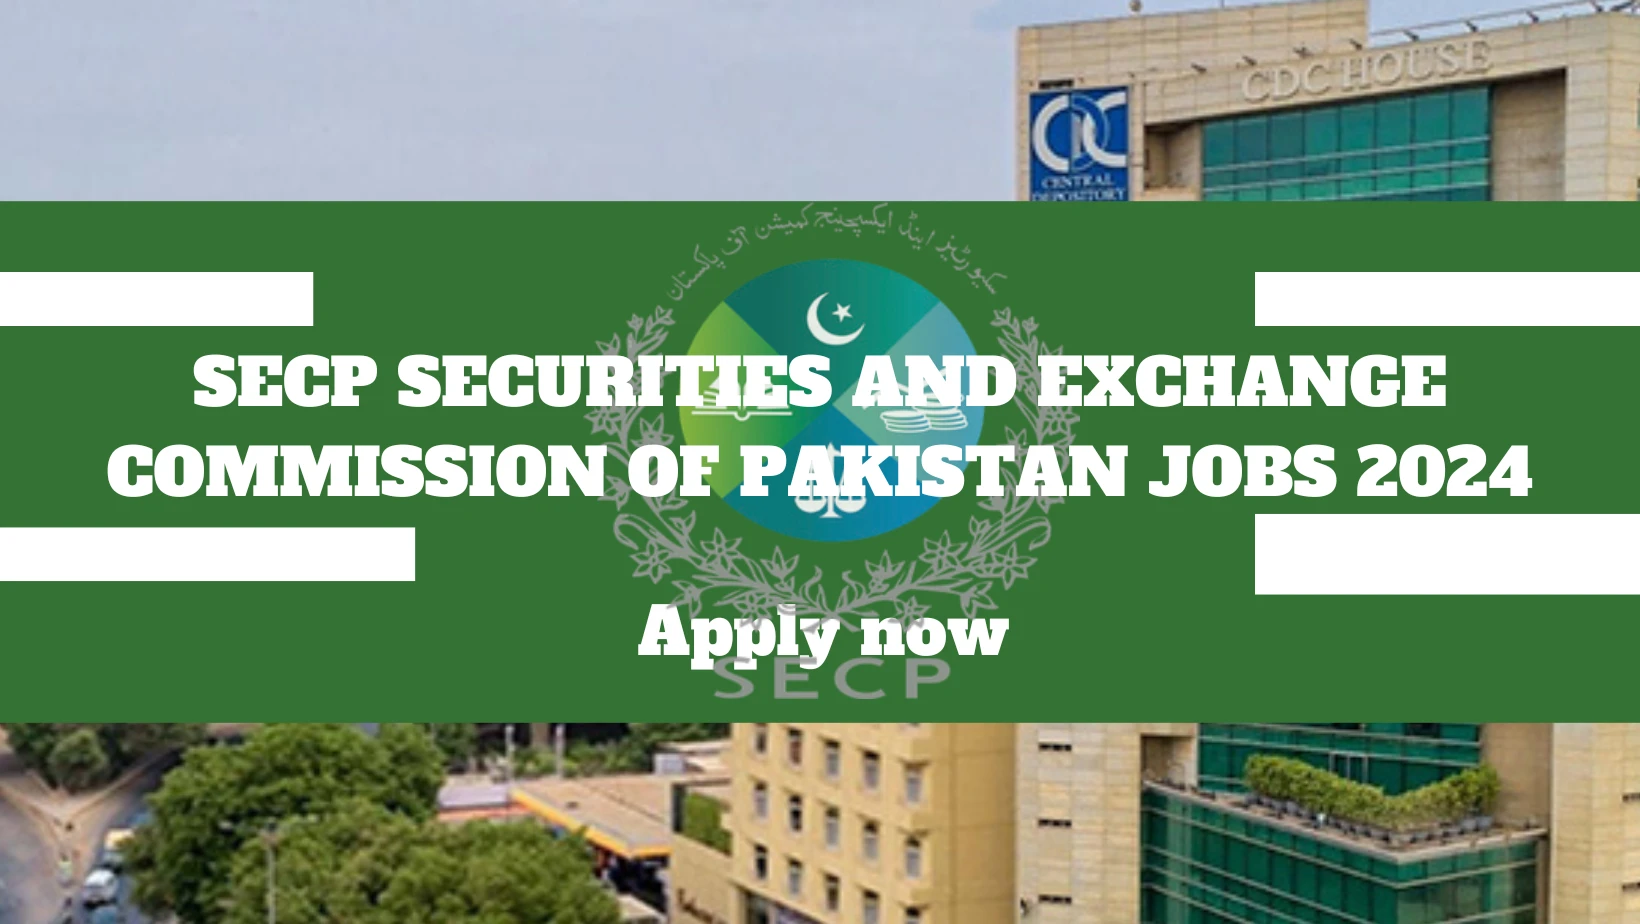 SECP SECURITIES AND EXCHANGE COMMISSION OF PAKISTAN